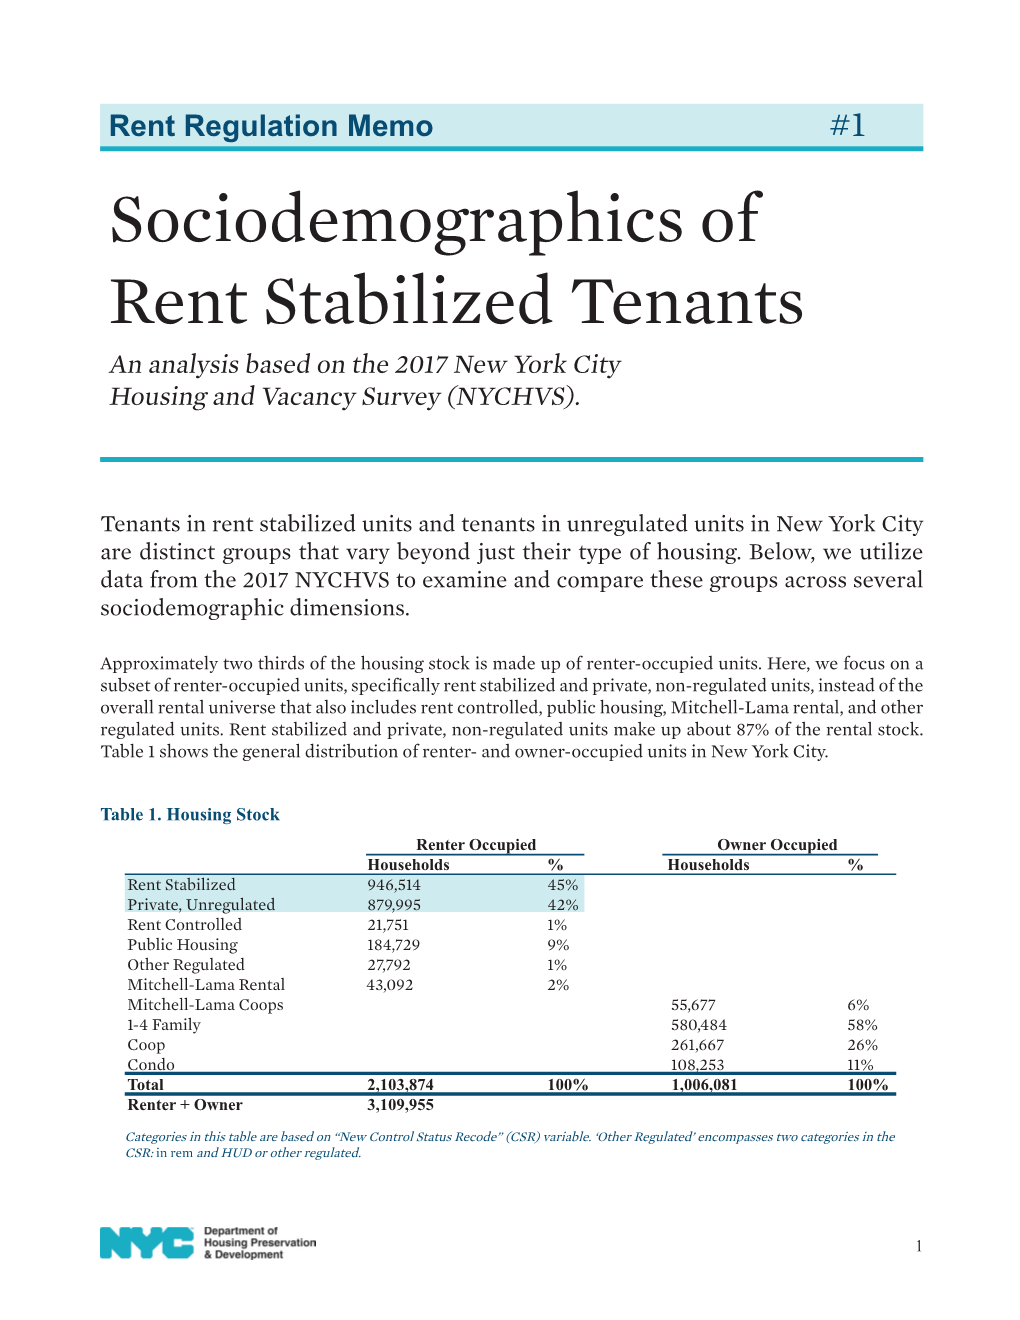 Sociodemographics of Rent Stabilized Tenants an Analysis Based on the 2017 New York City Housing and Vacancy Survey (NYCHVS)